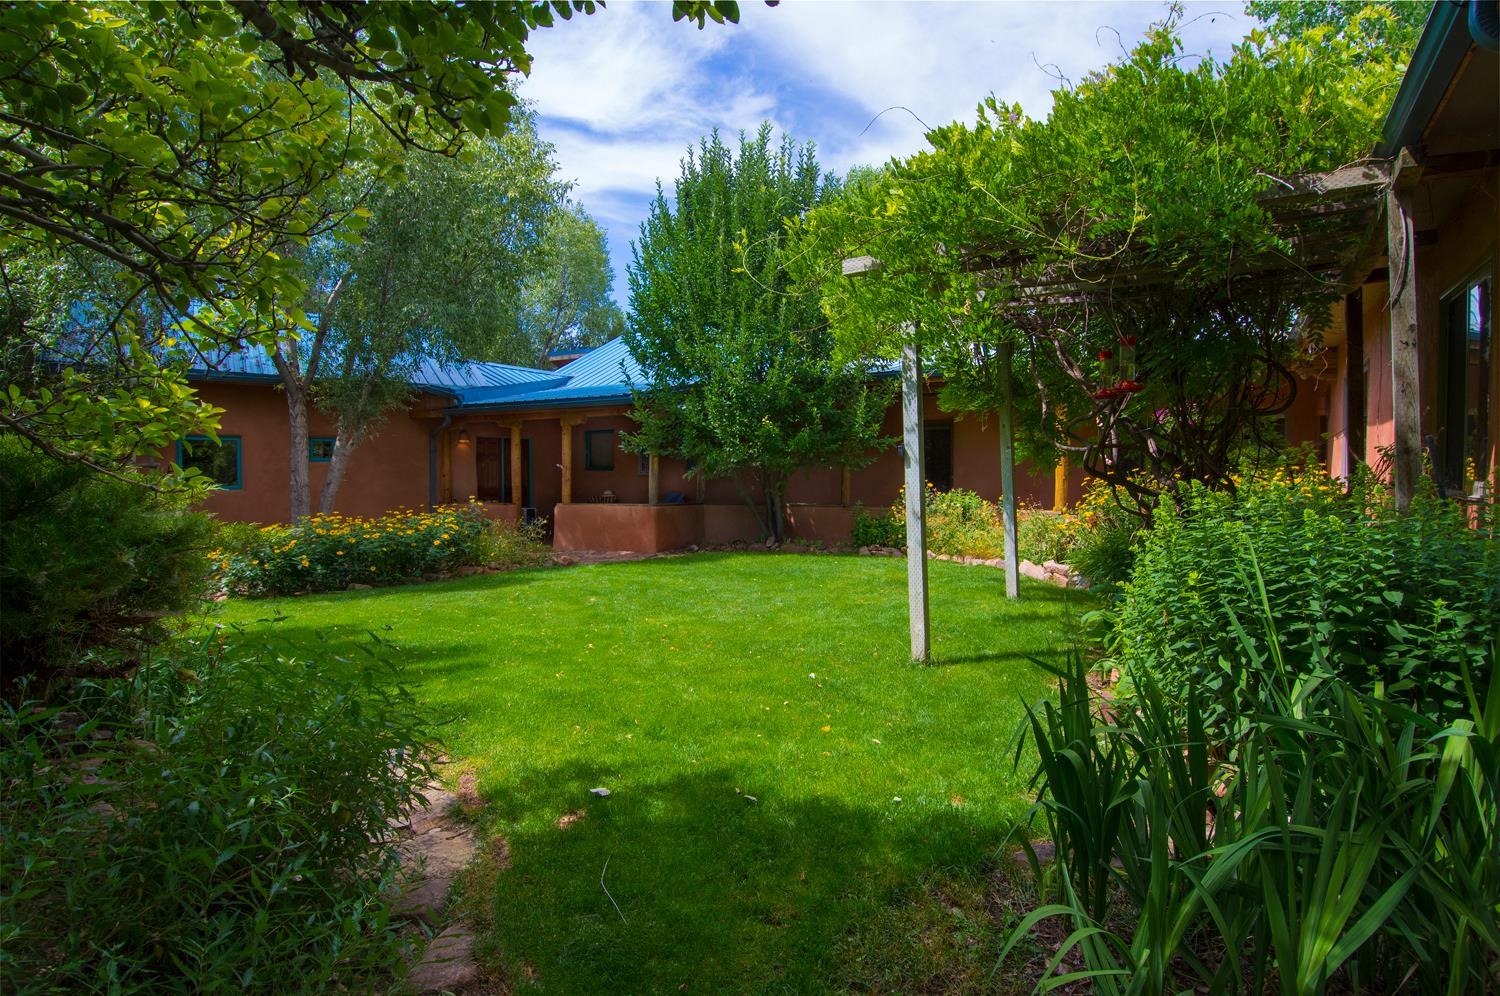 106 Old Canoncito, Santa Fe, New Mexico 87508, 5 Bedrooms Bedrooms, ,4 BathroomsBathrooms,Residential,For Sale,106 Old Canoncito,202201263